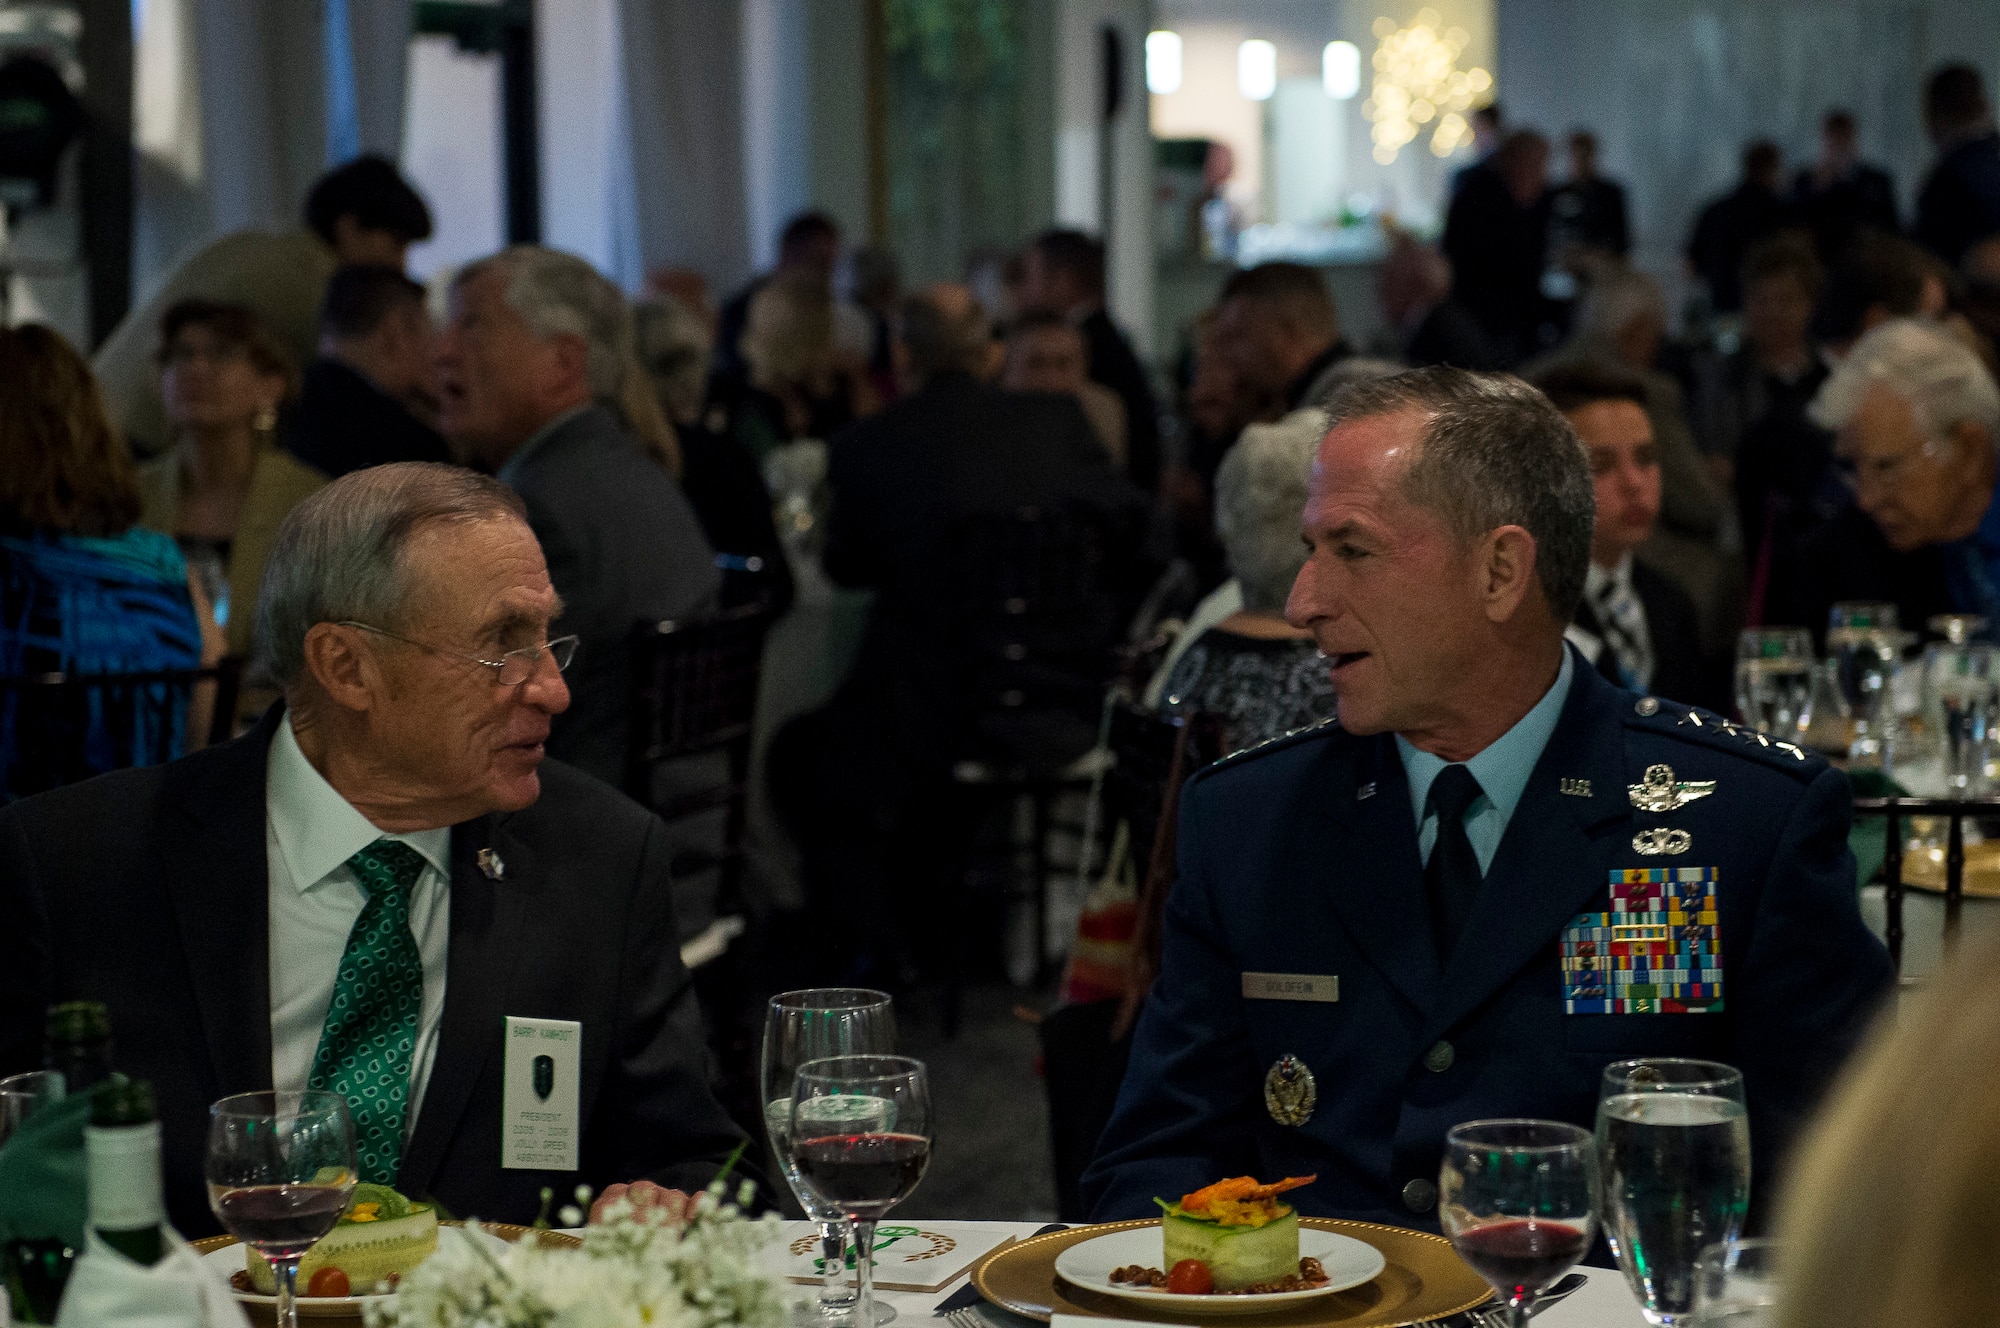 Air Force Chief of Staff Gen. David L. Goldfein, right, speaks with Barry Kamhoot, former Jolly Green Association (JGA) president, during the JGA 50th reunion banquet, May 4, 2019, in Fort Walton Beach, Fla. The JGA presented Airmen from the 41st Rescue Squadron (RQS) and the 48th RQS with the Rescue Mission of the Year award; the only non Air Force rescue award recognized by the Air Force. (U.S. Air Force Photo by Staff Sgt. Janiqua P. Robinson)